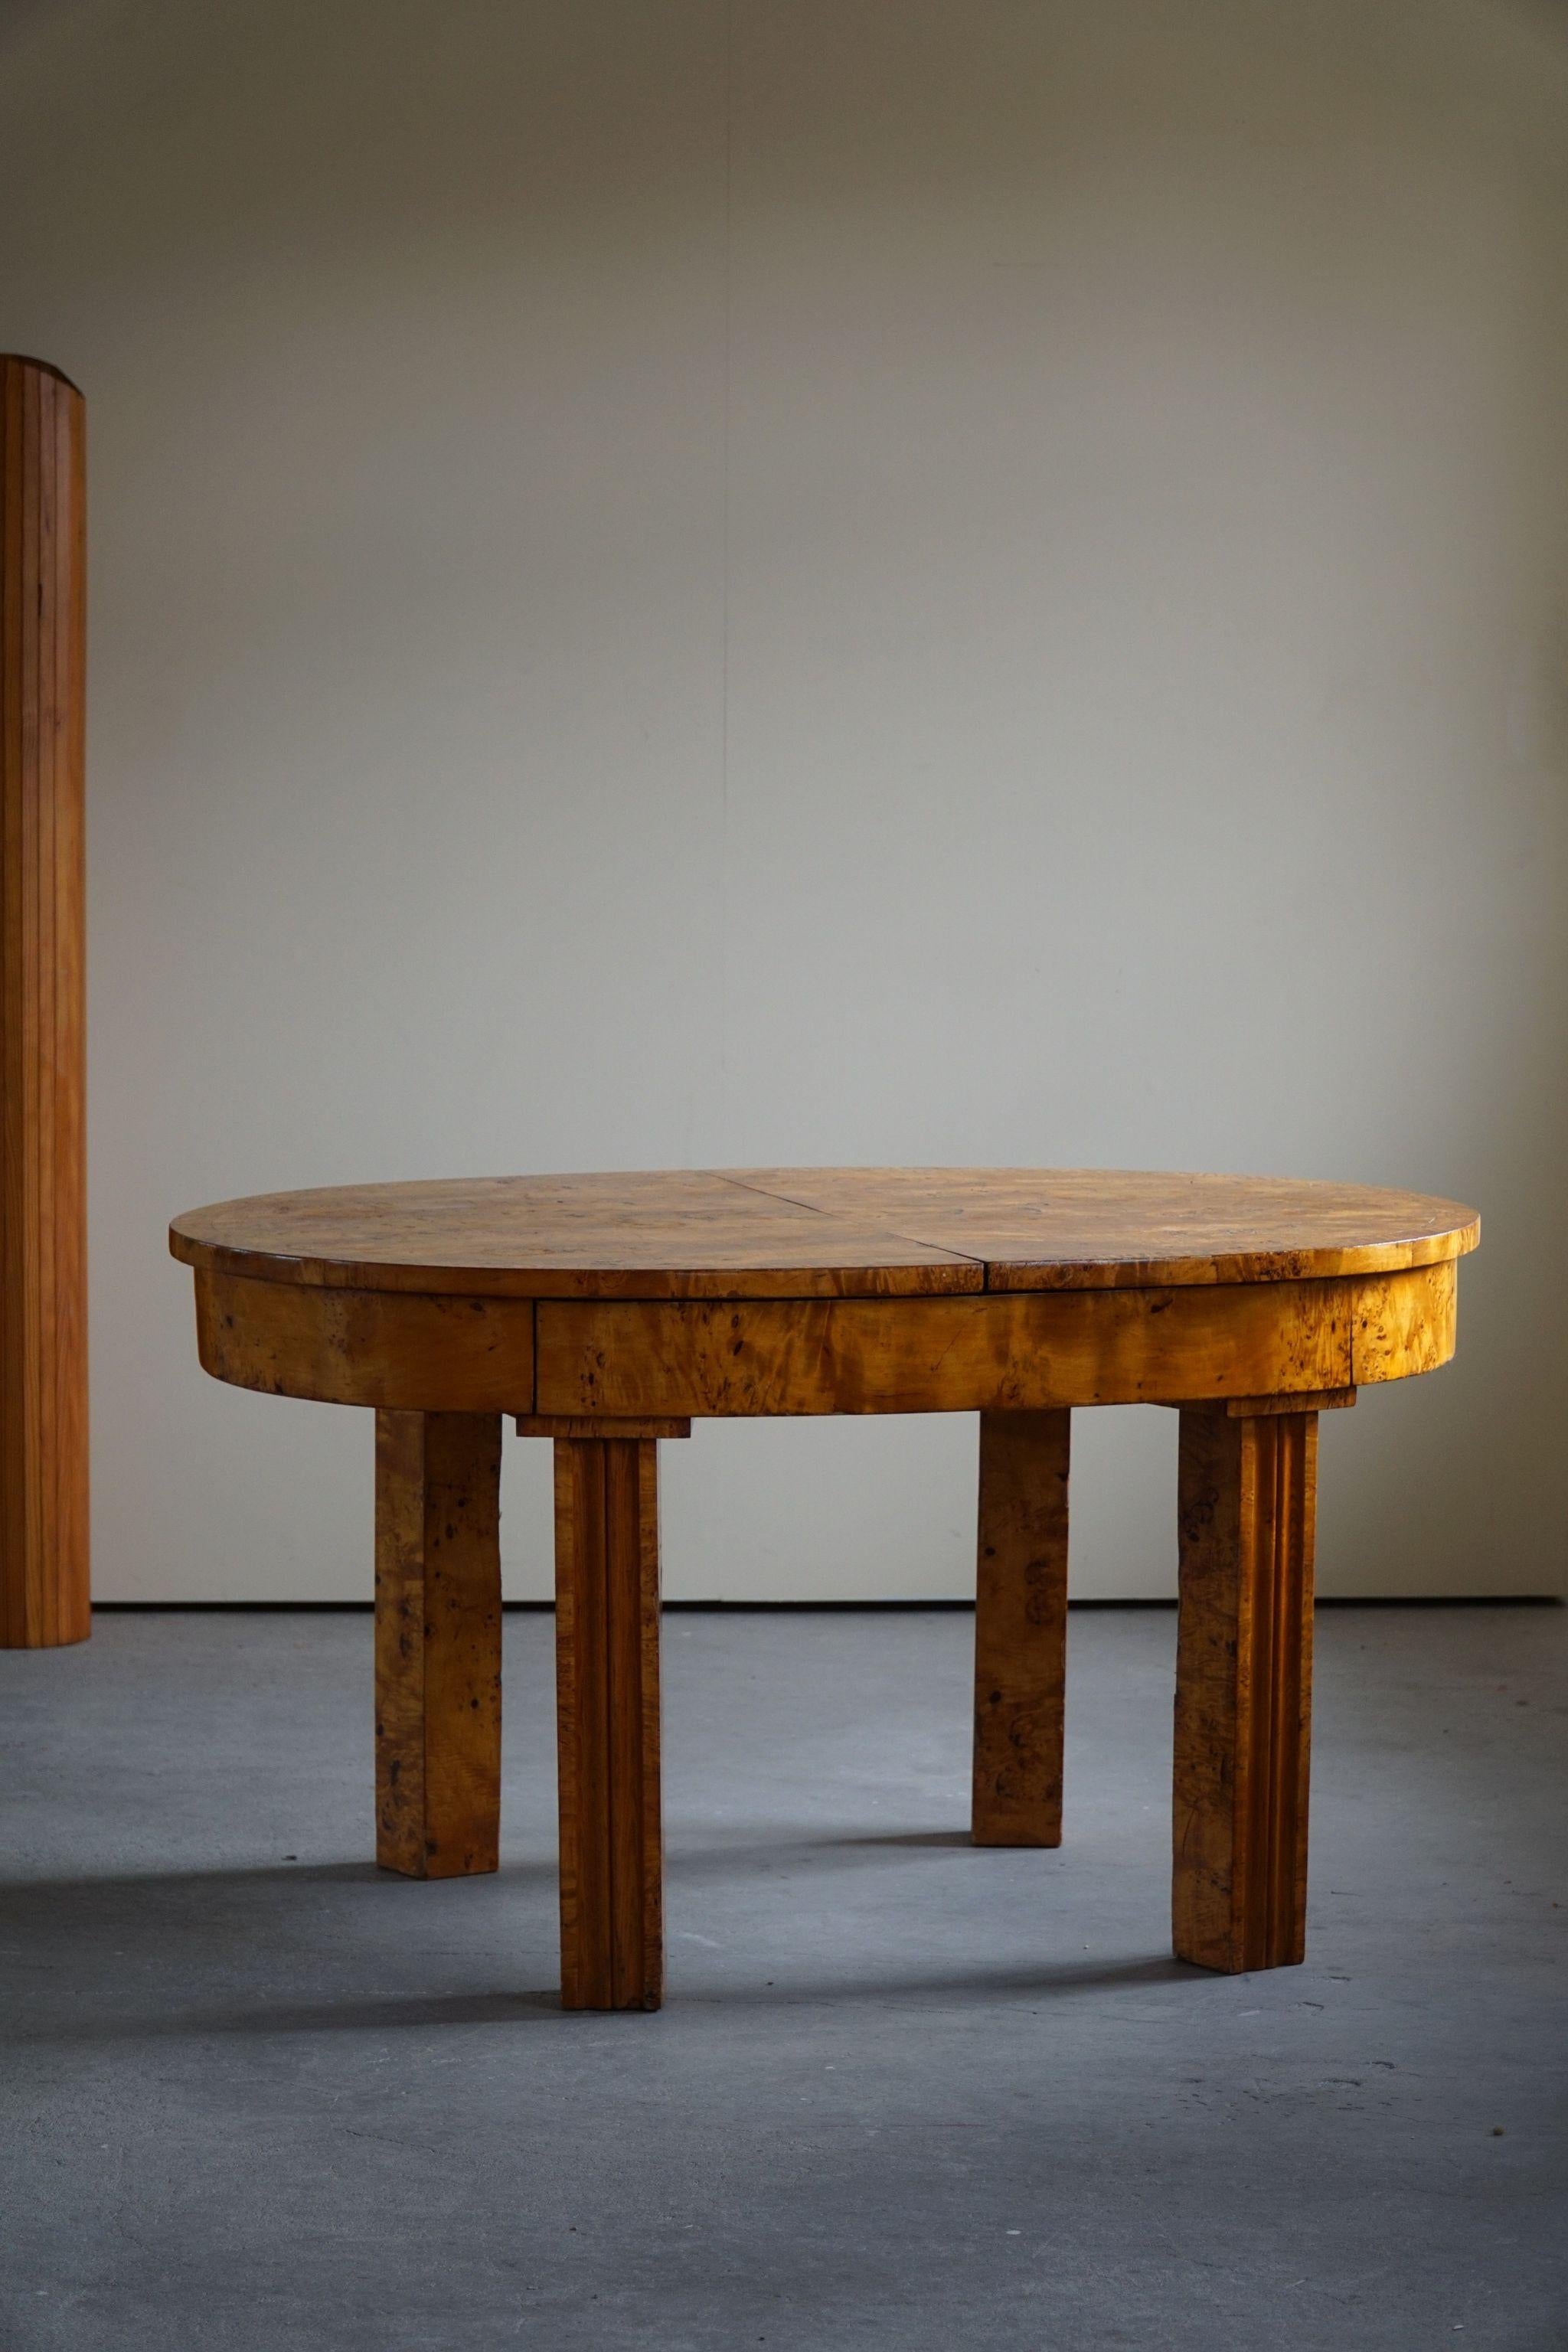 20th Century Swedish Art Deco Oval Dining Table in Burl Wood, 1930s